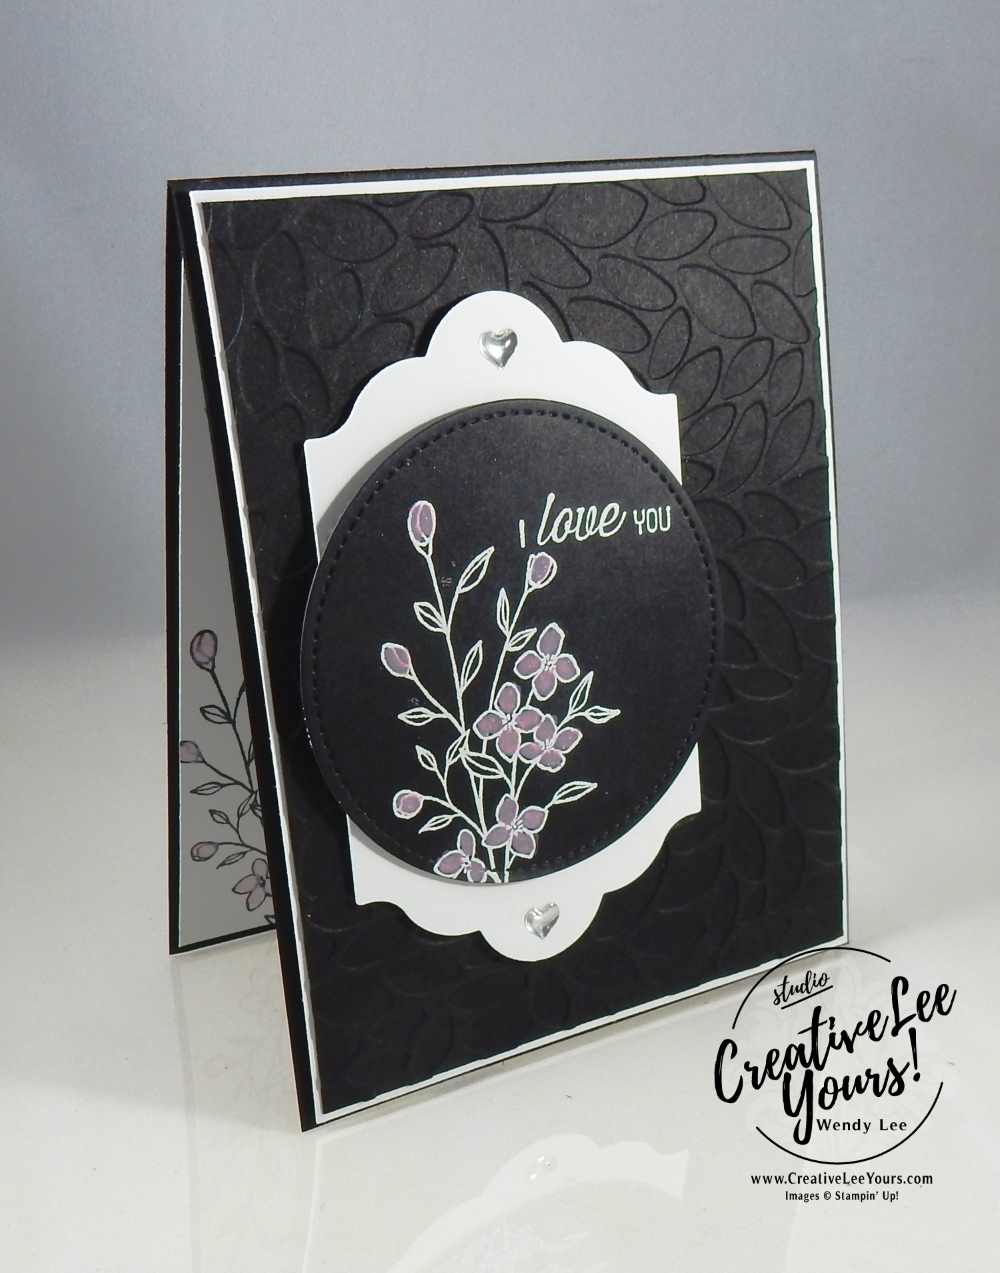 I Love You Painting by Wendy Lee, Stampin Up, #creativeleeyours, January 2017 FMN class, Touches of Texture stamp set, Flourishing Phrases stamp set, painting technique